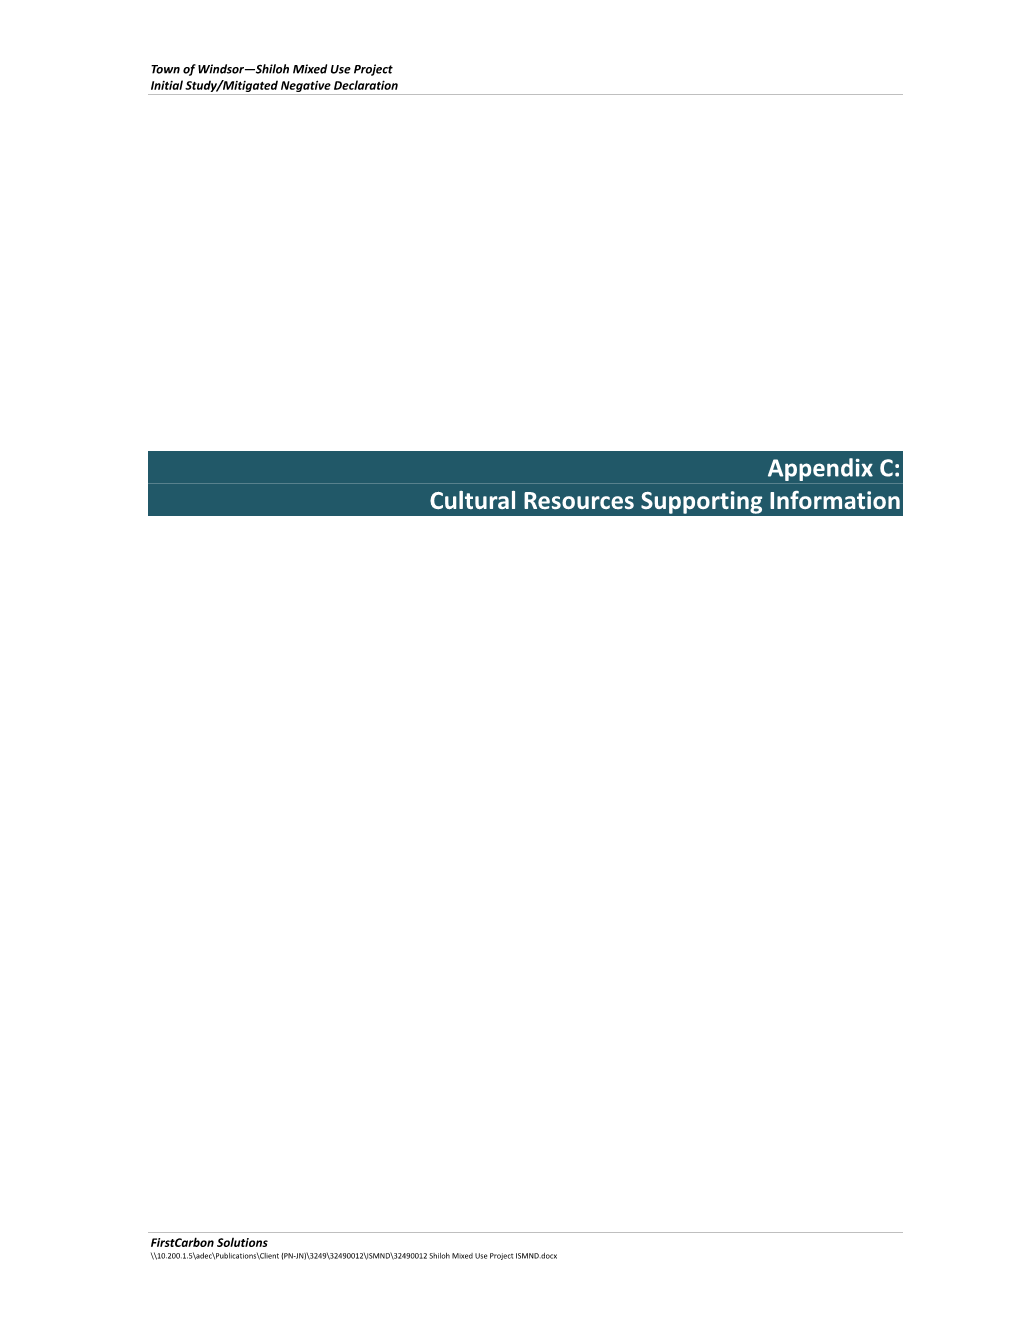 Appendix C: Cultural Resources Supporting Information